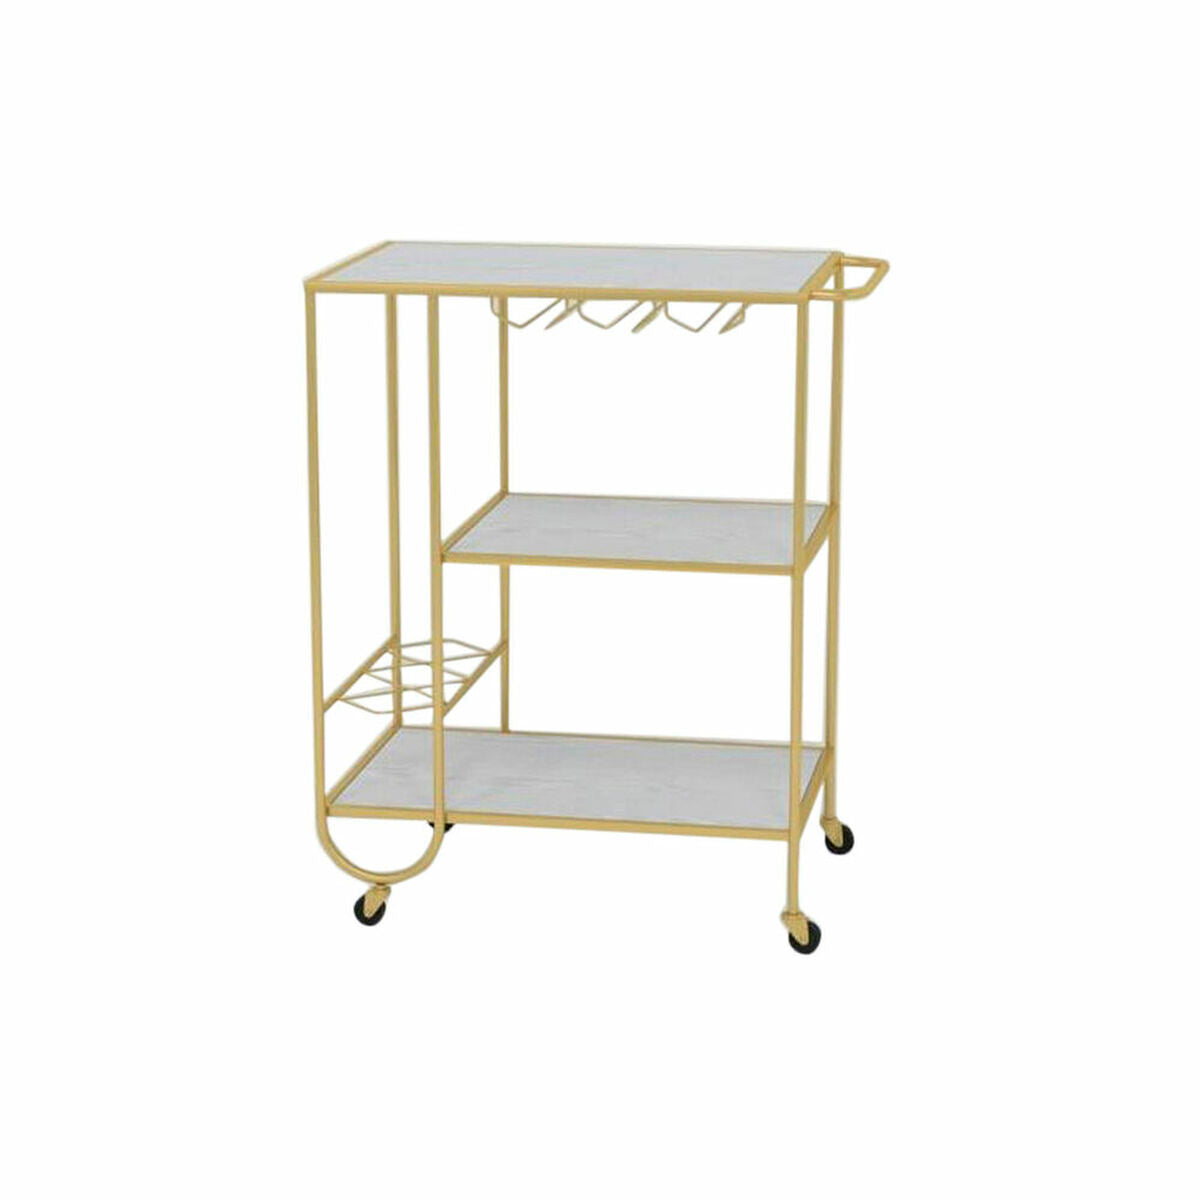 Serving trolley DKD Home Decor White Golden Metal MDF Wood 66,5 x 40 x